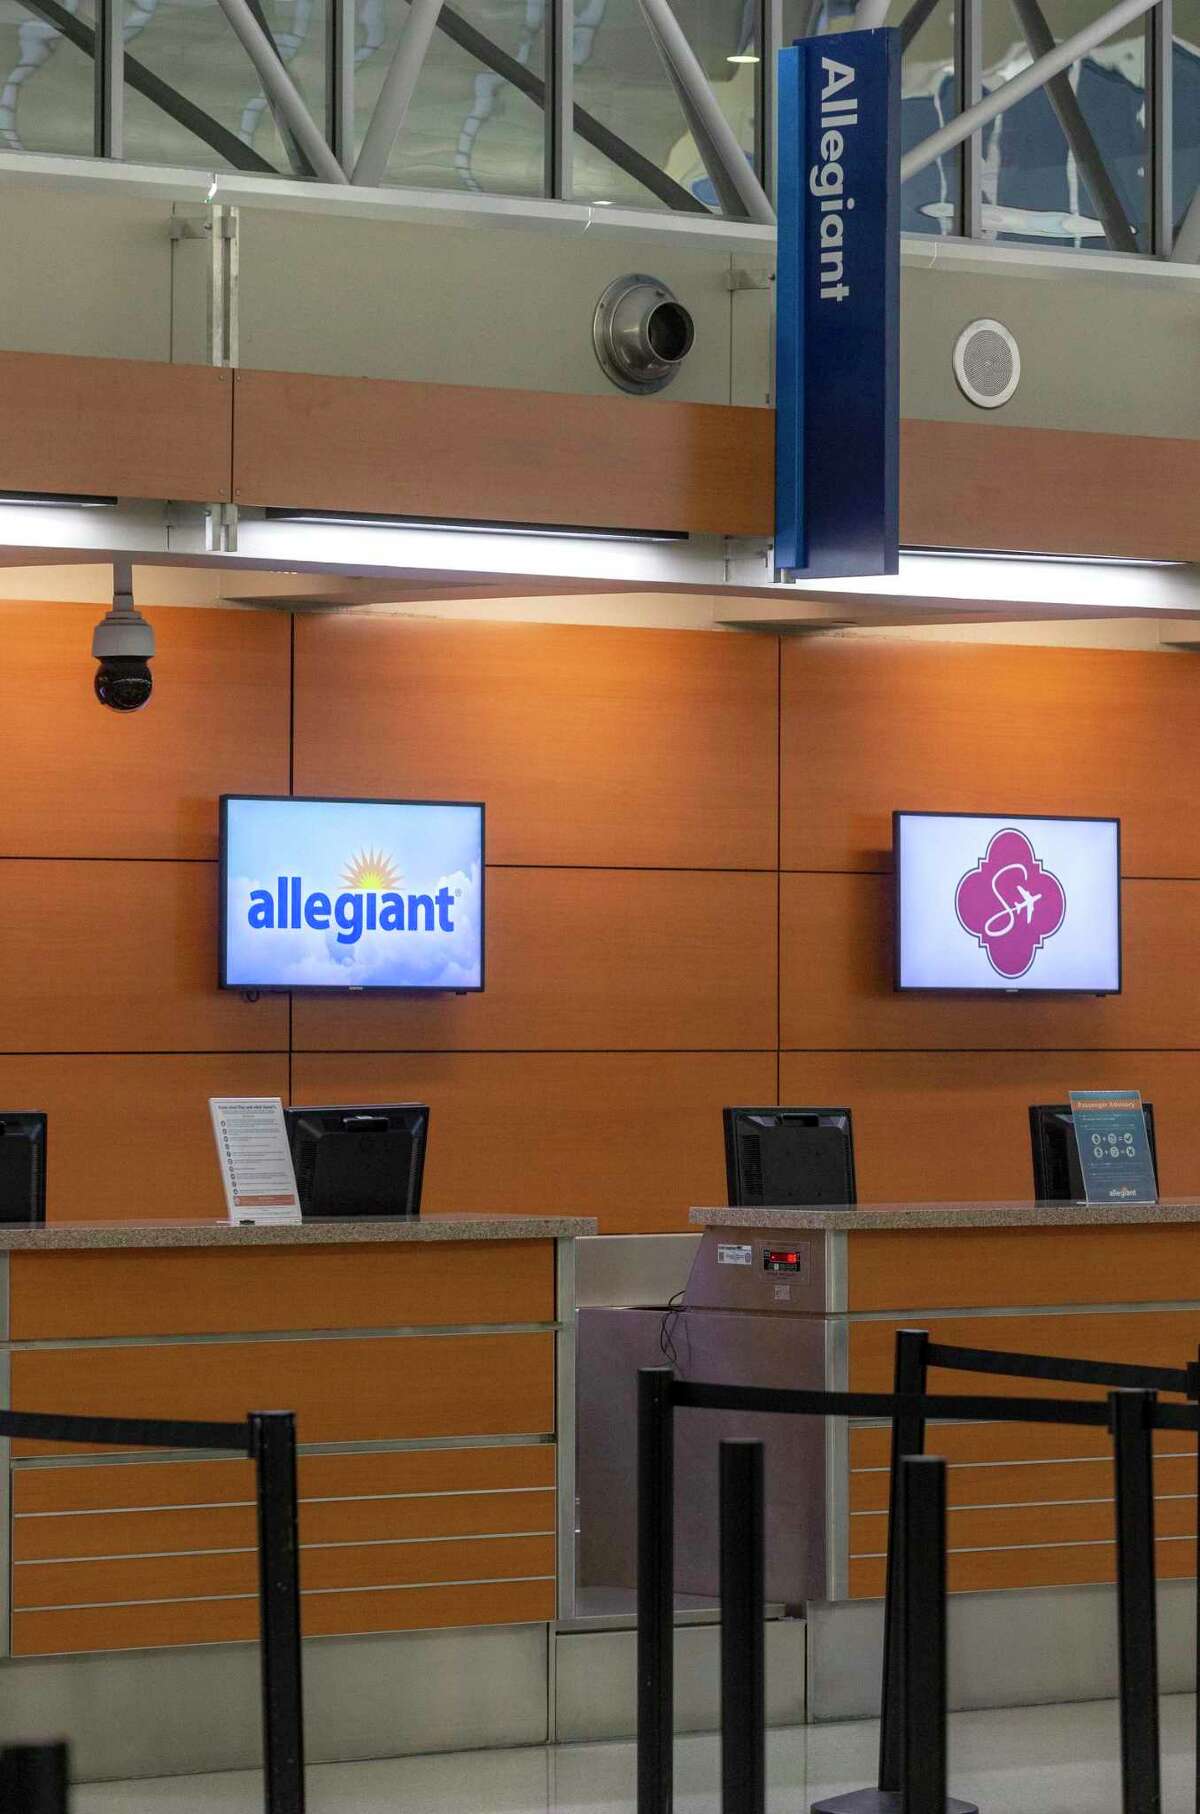 The Allegiant airline ticket counter stands empty Wednesday, April 22, 2020 at the San Antonio International Airport. Despite receiving $172 million in federal stimulus money, Allegiant is asking for a waiver from the government to allow it to cut San Antonio service.